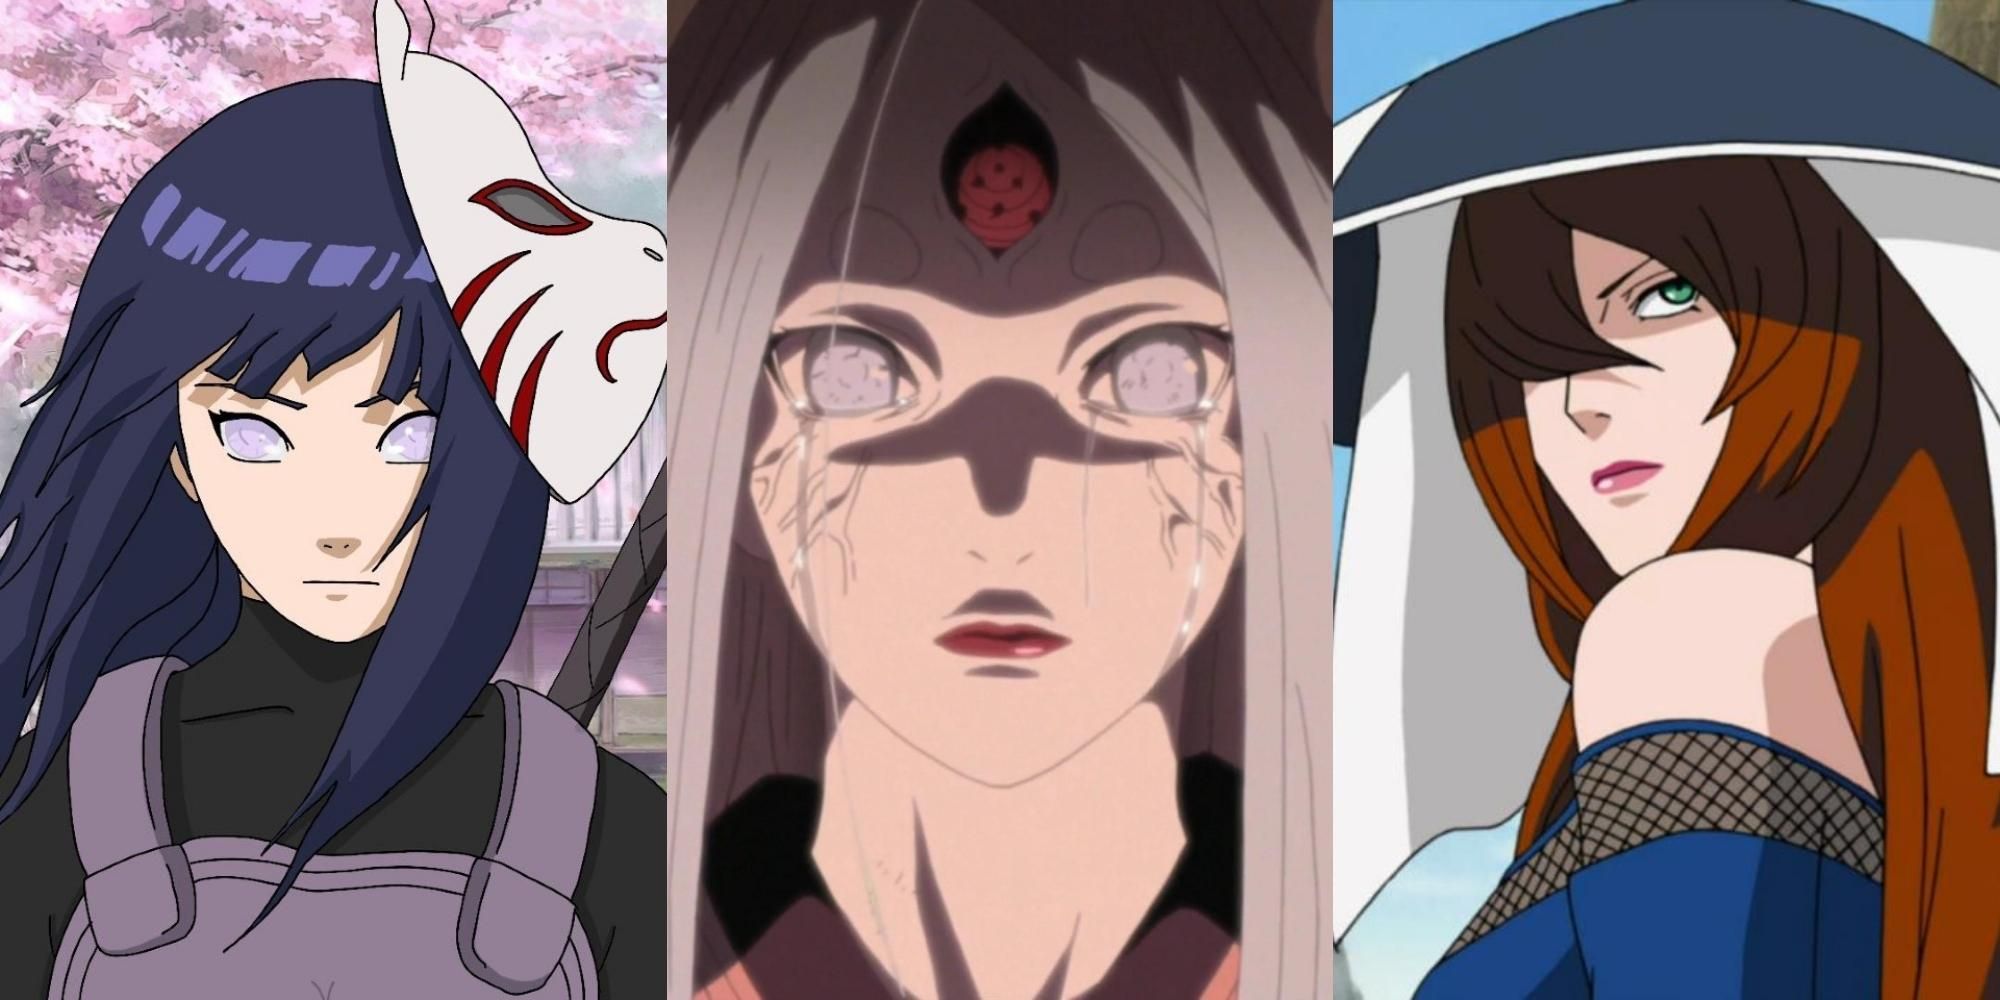 angel come recommends hot female naruto characters pic